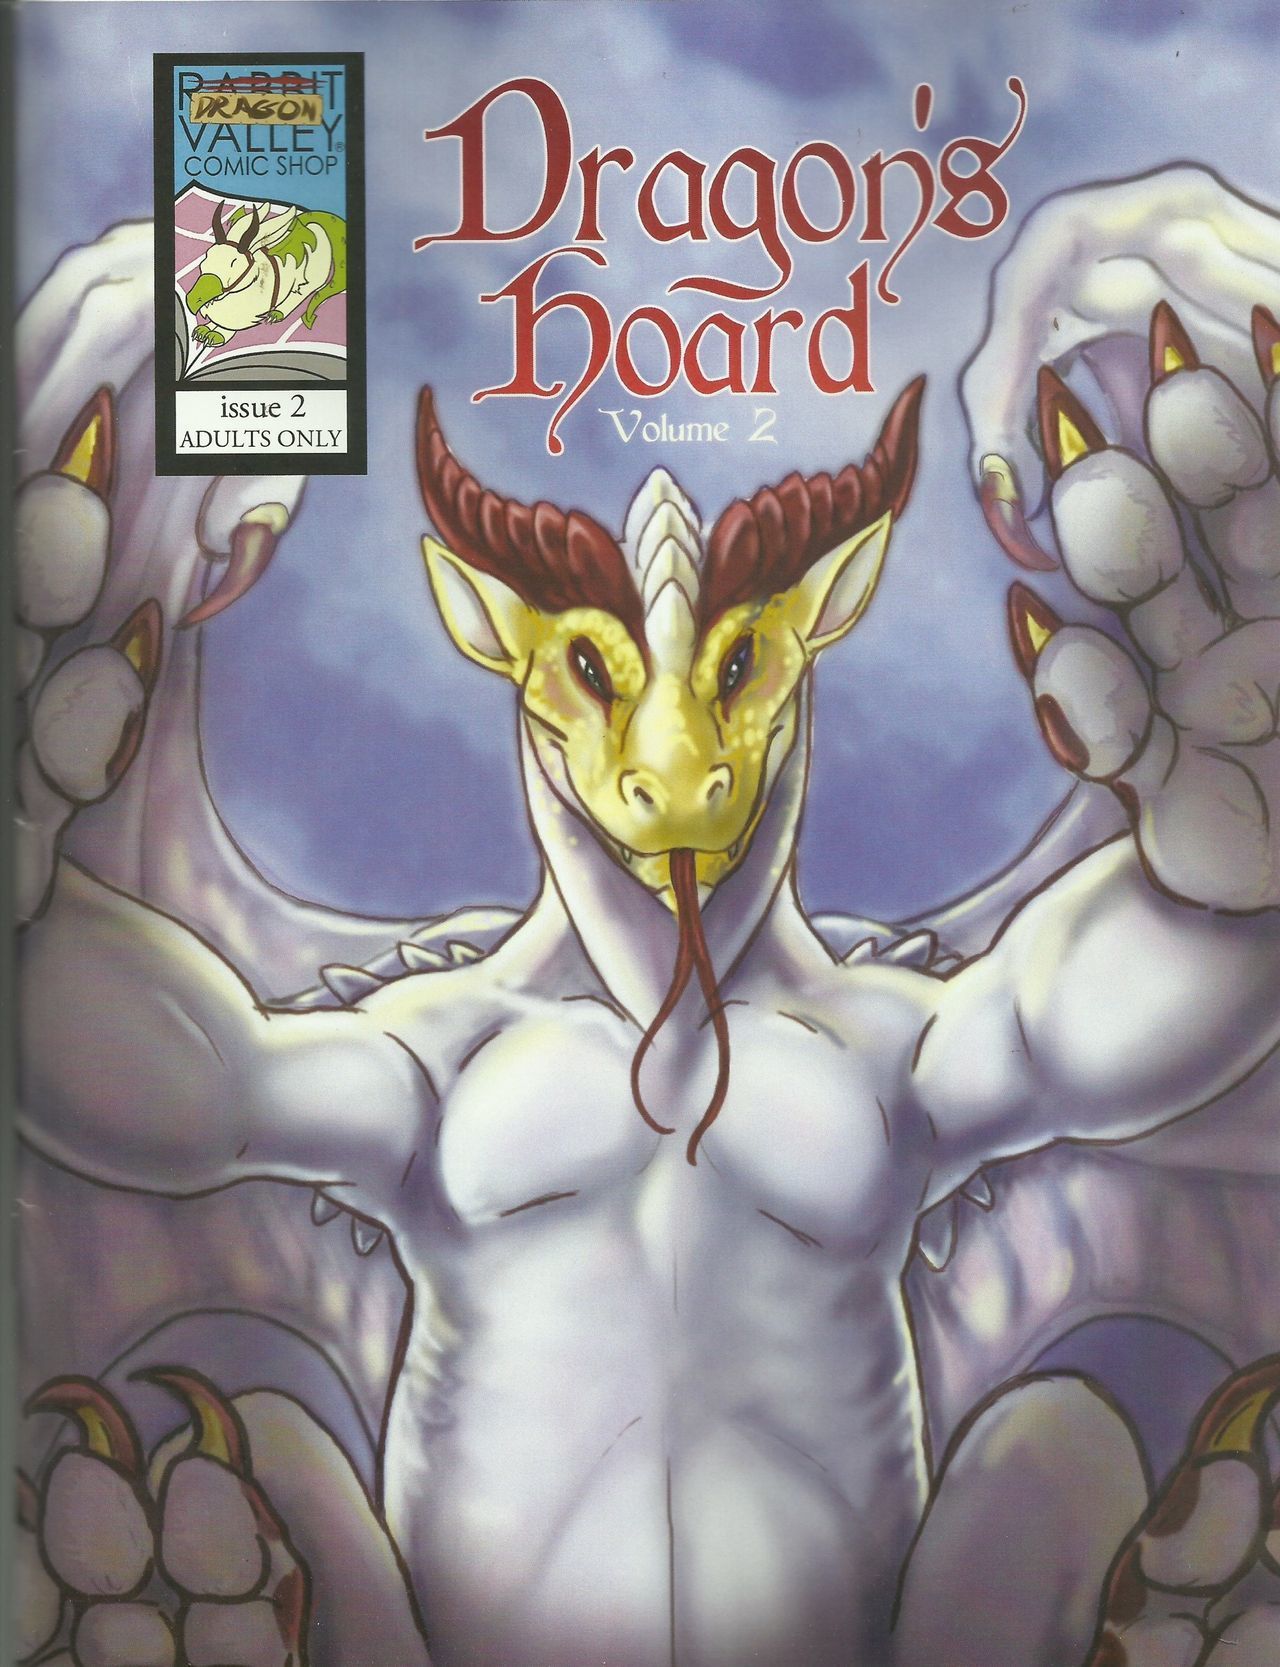 Dragon\'s Hoard Volume 2 (Composition of different artists)